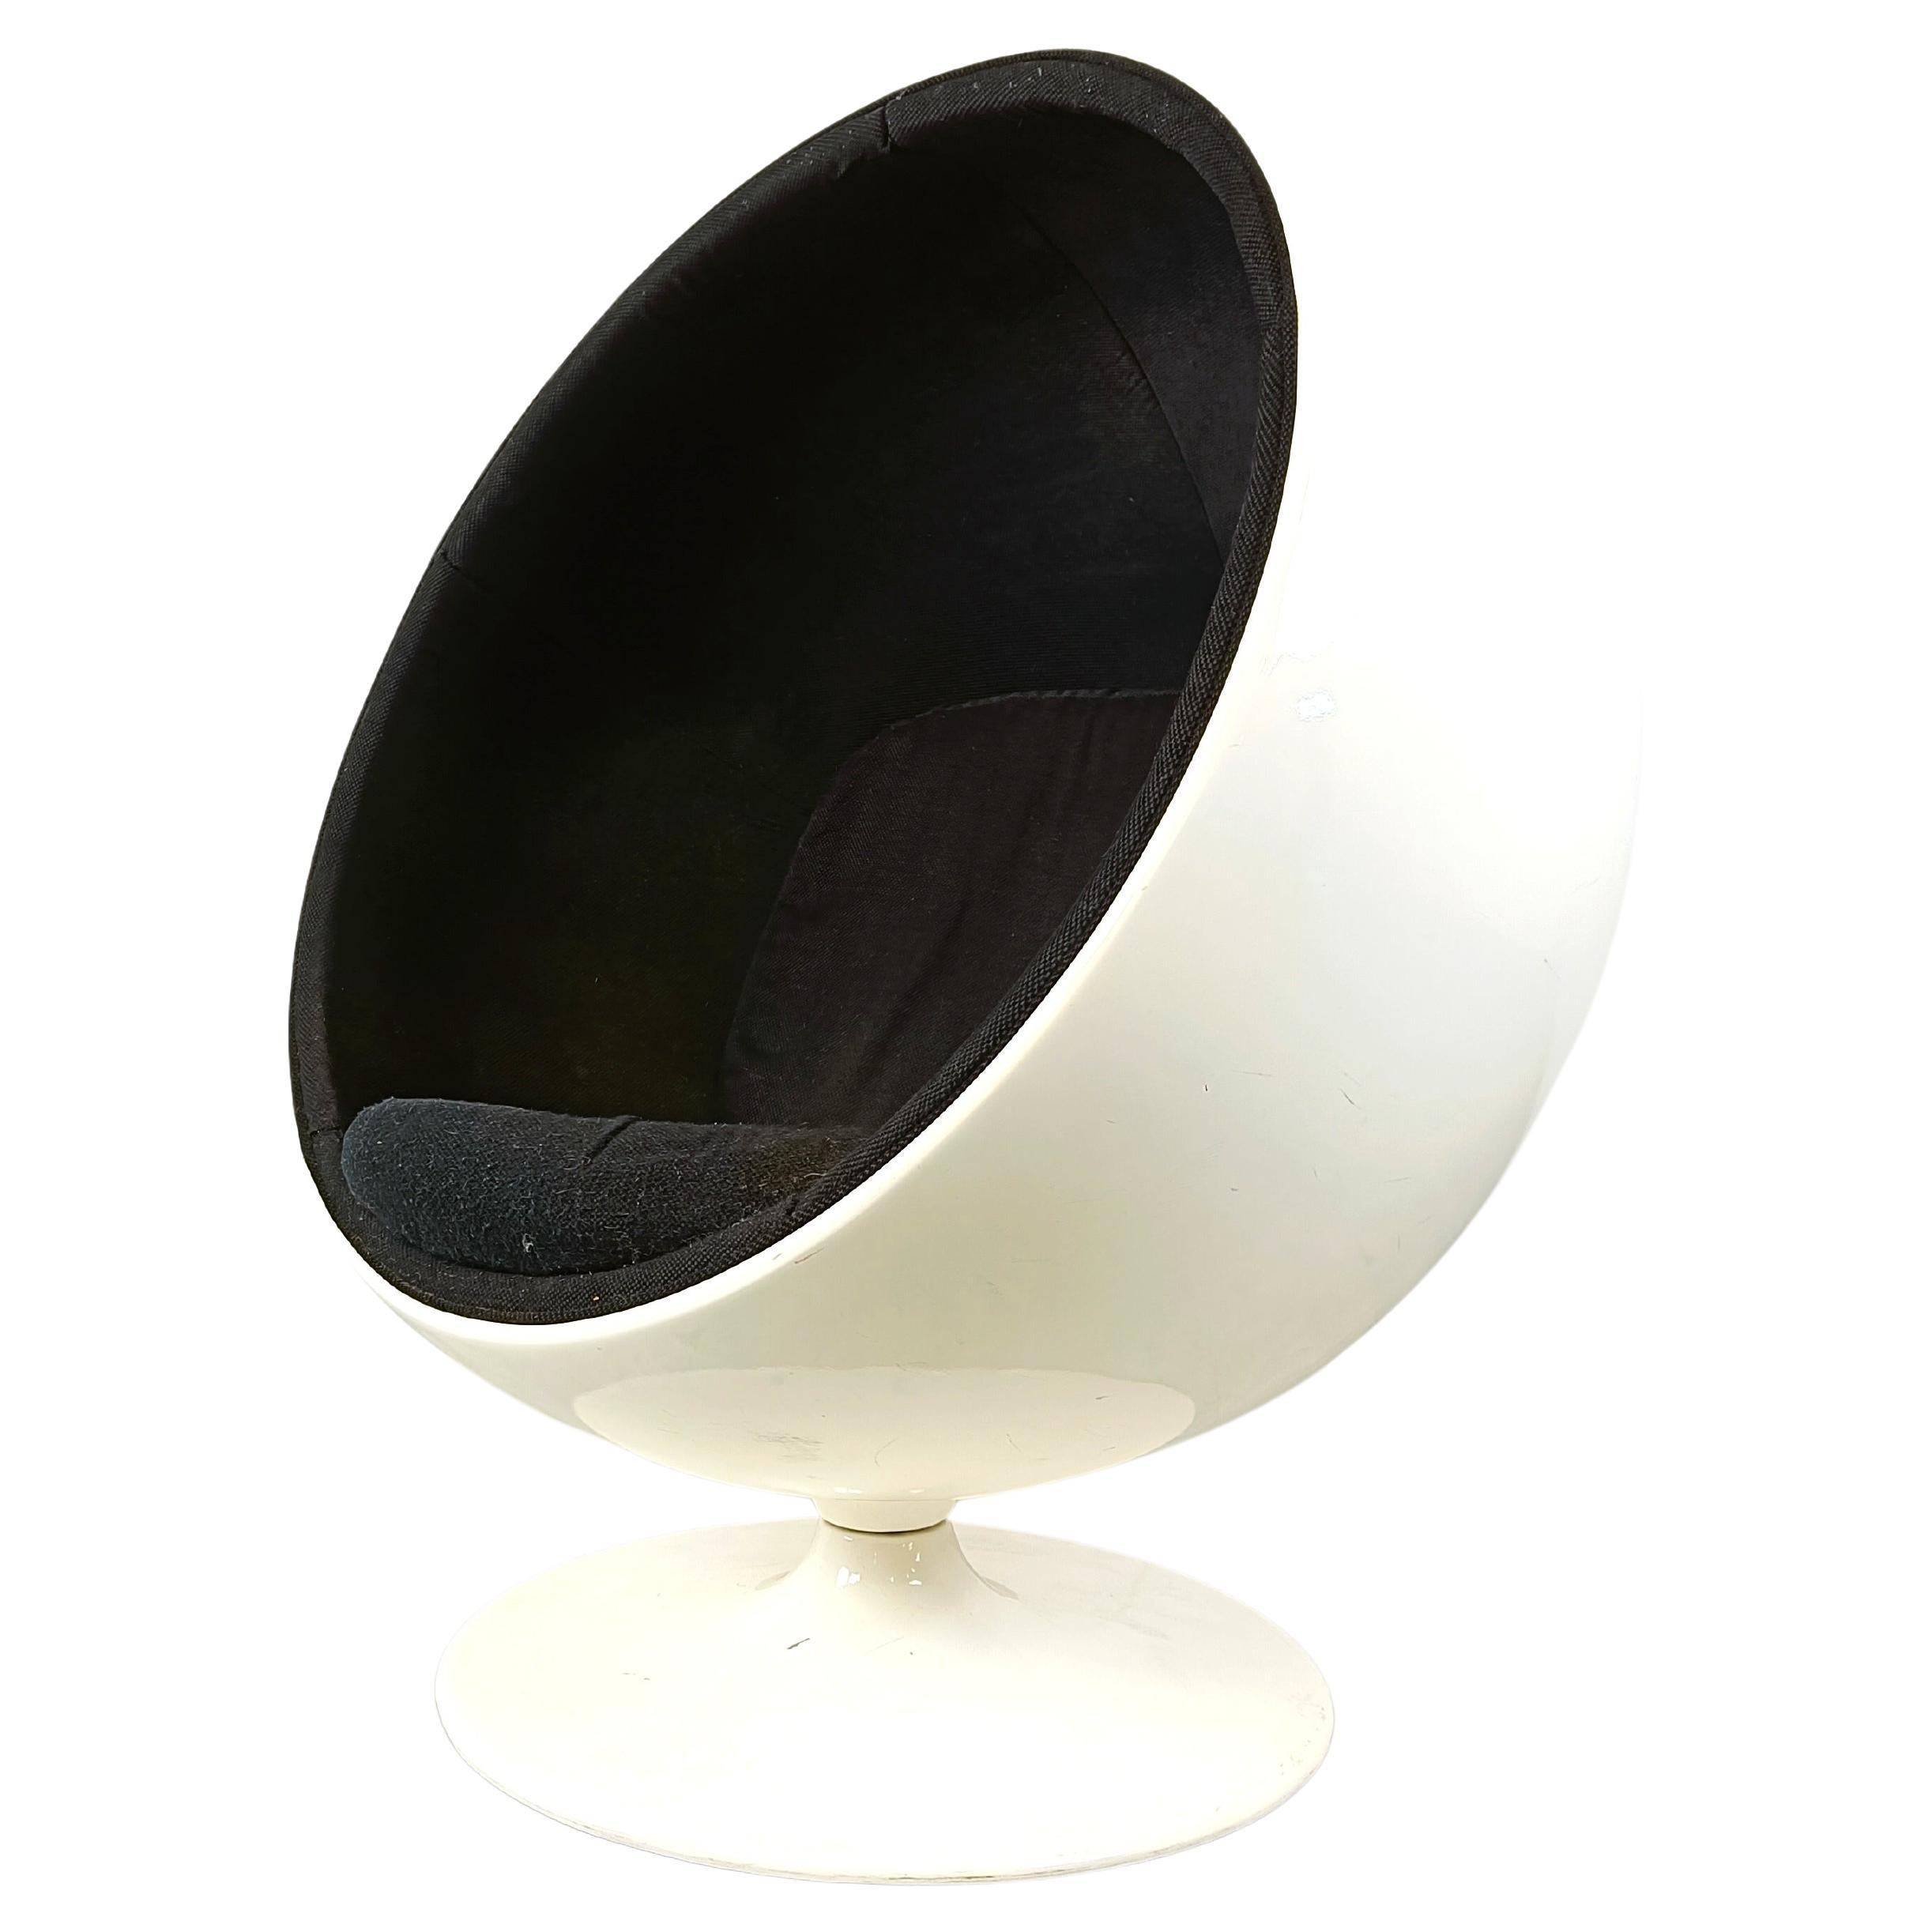 Swivel ball chair attributed to Eero Aarnio, 1980s For Sale